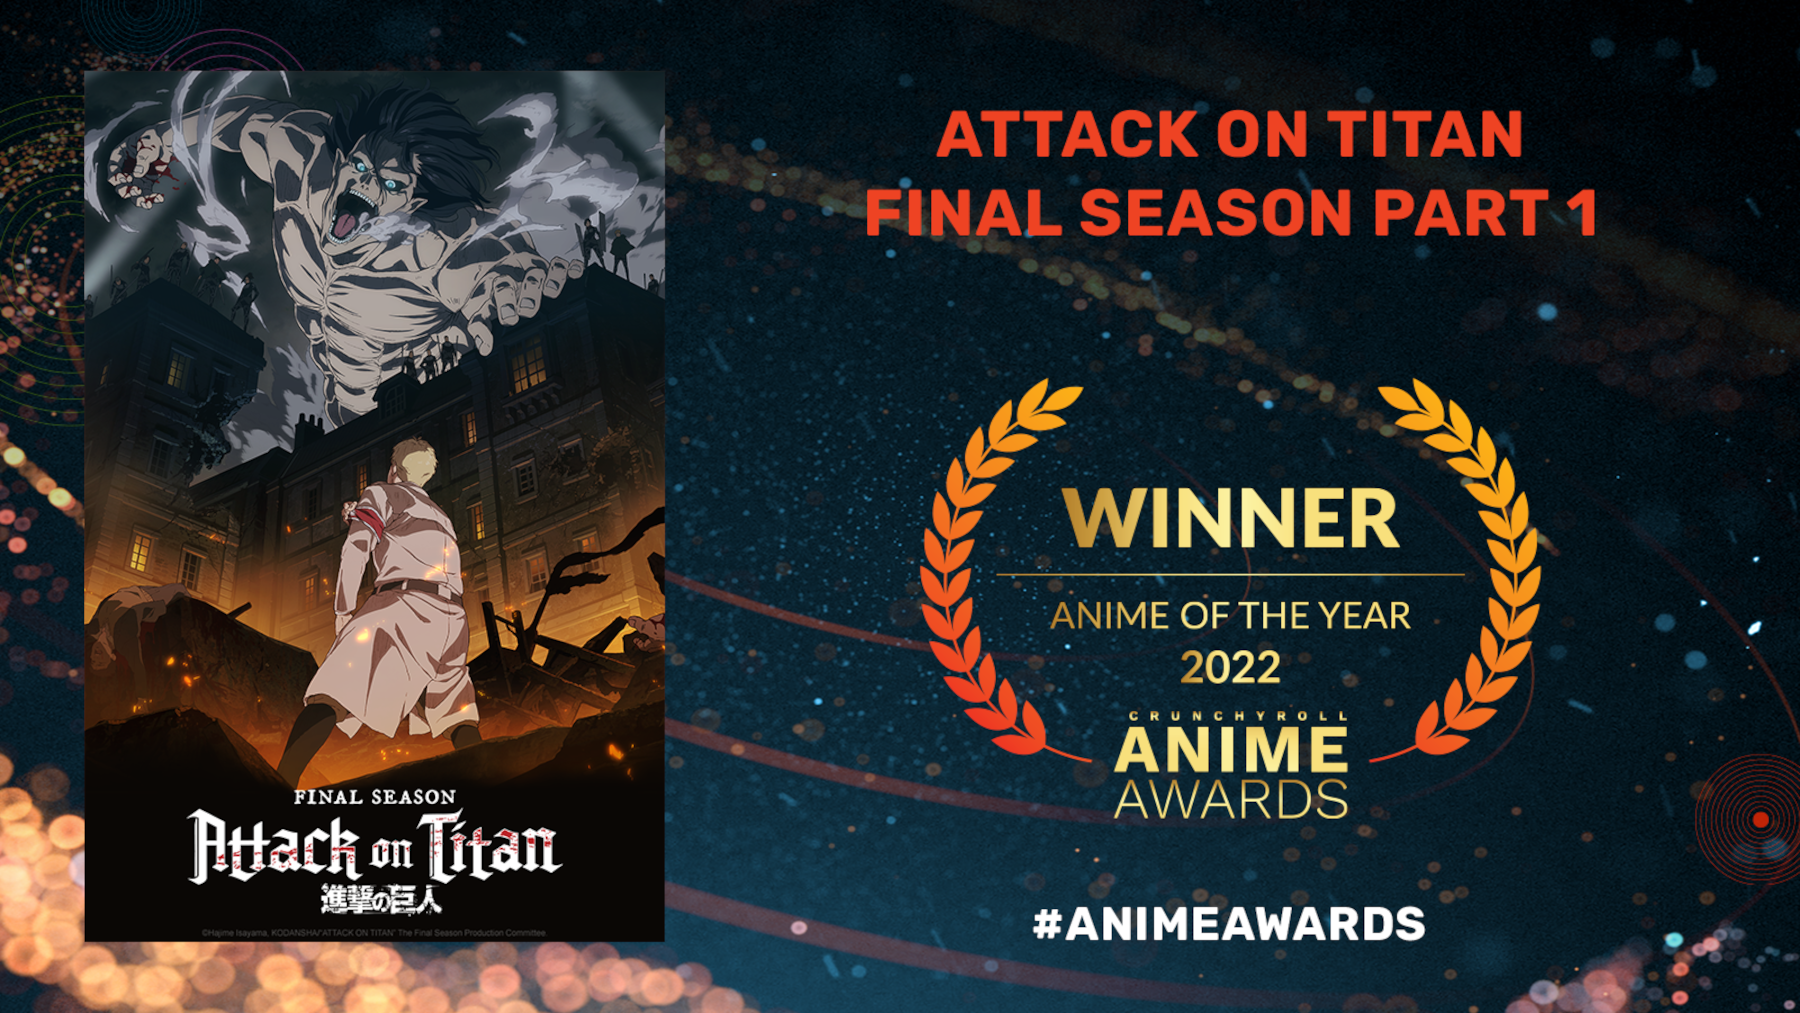 Crunchyroll Names 'Attack on Titan' Anime of the Year in 2022 Anime